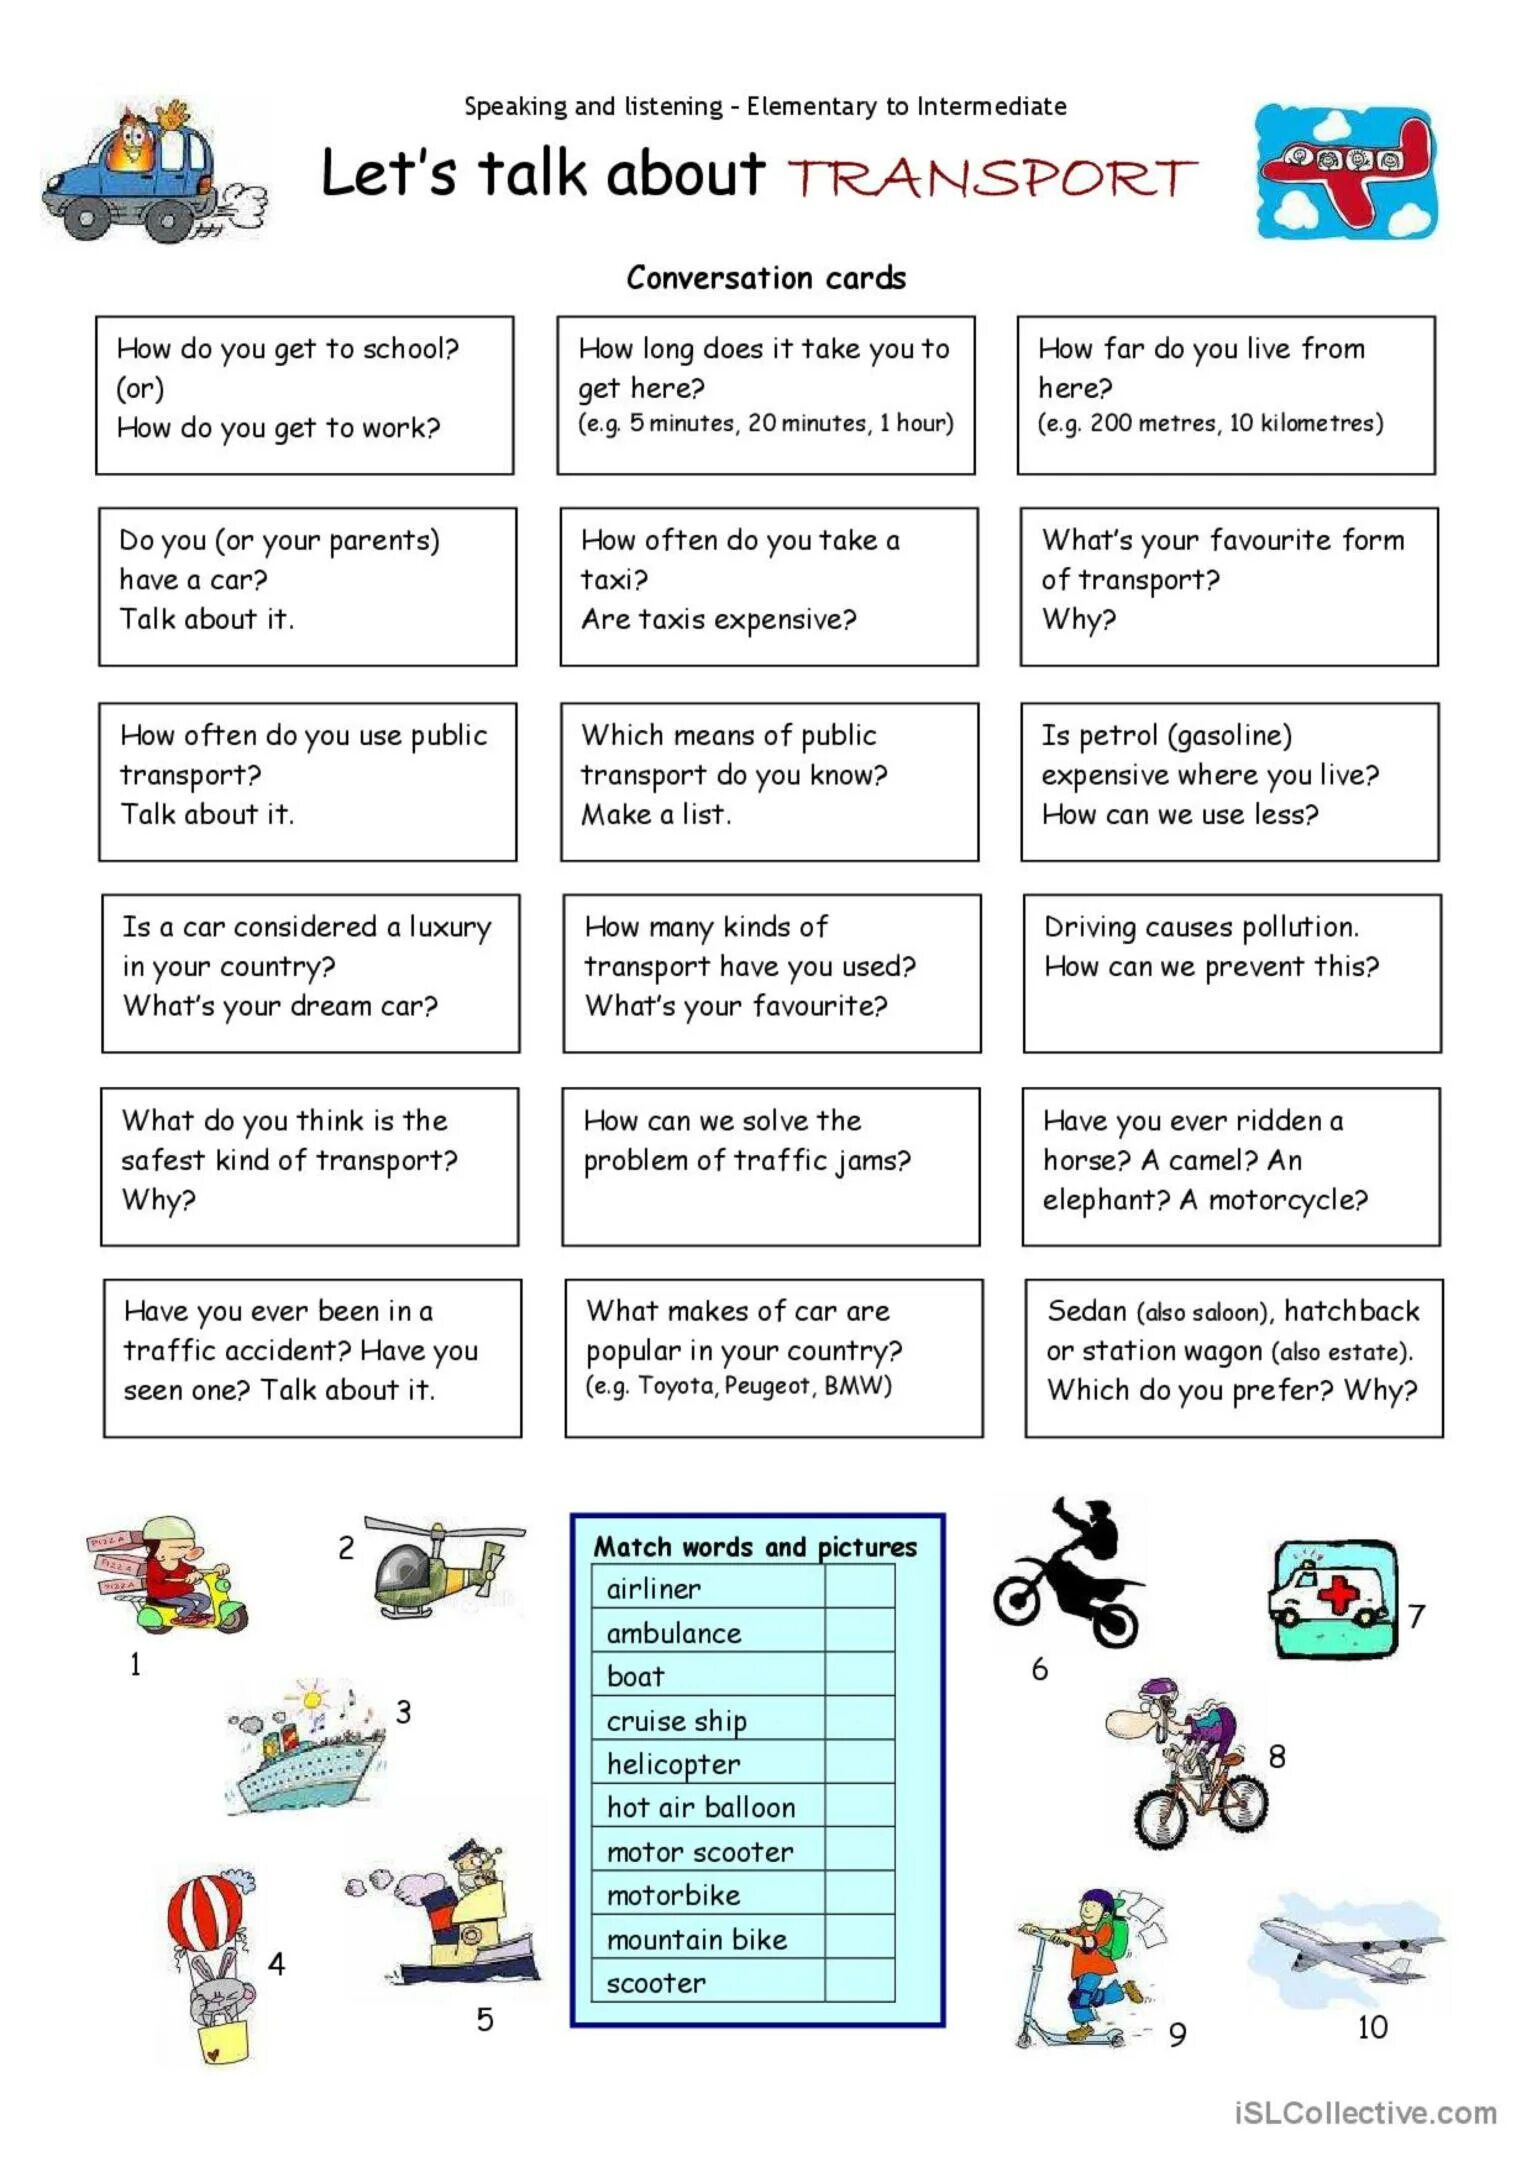 Speaking Cards английскому языку. Let's talk about transport/ ответы. Английский speaking Worksheet. Speaking activities Cards. Questions about travelling